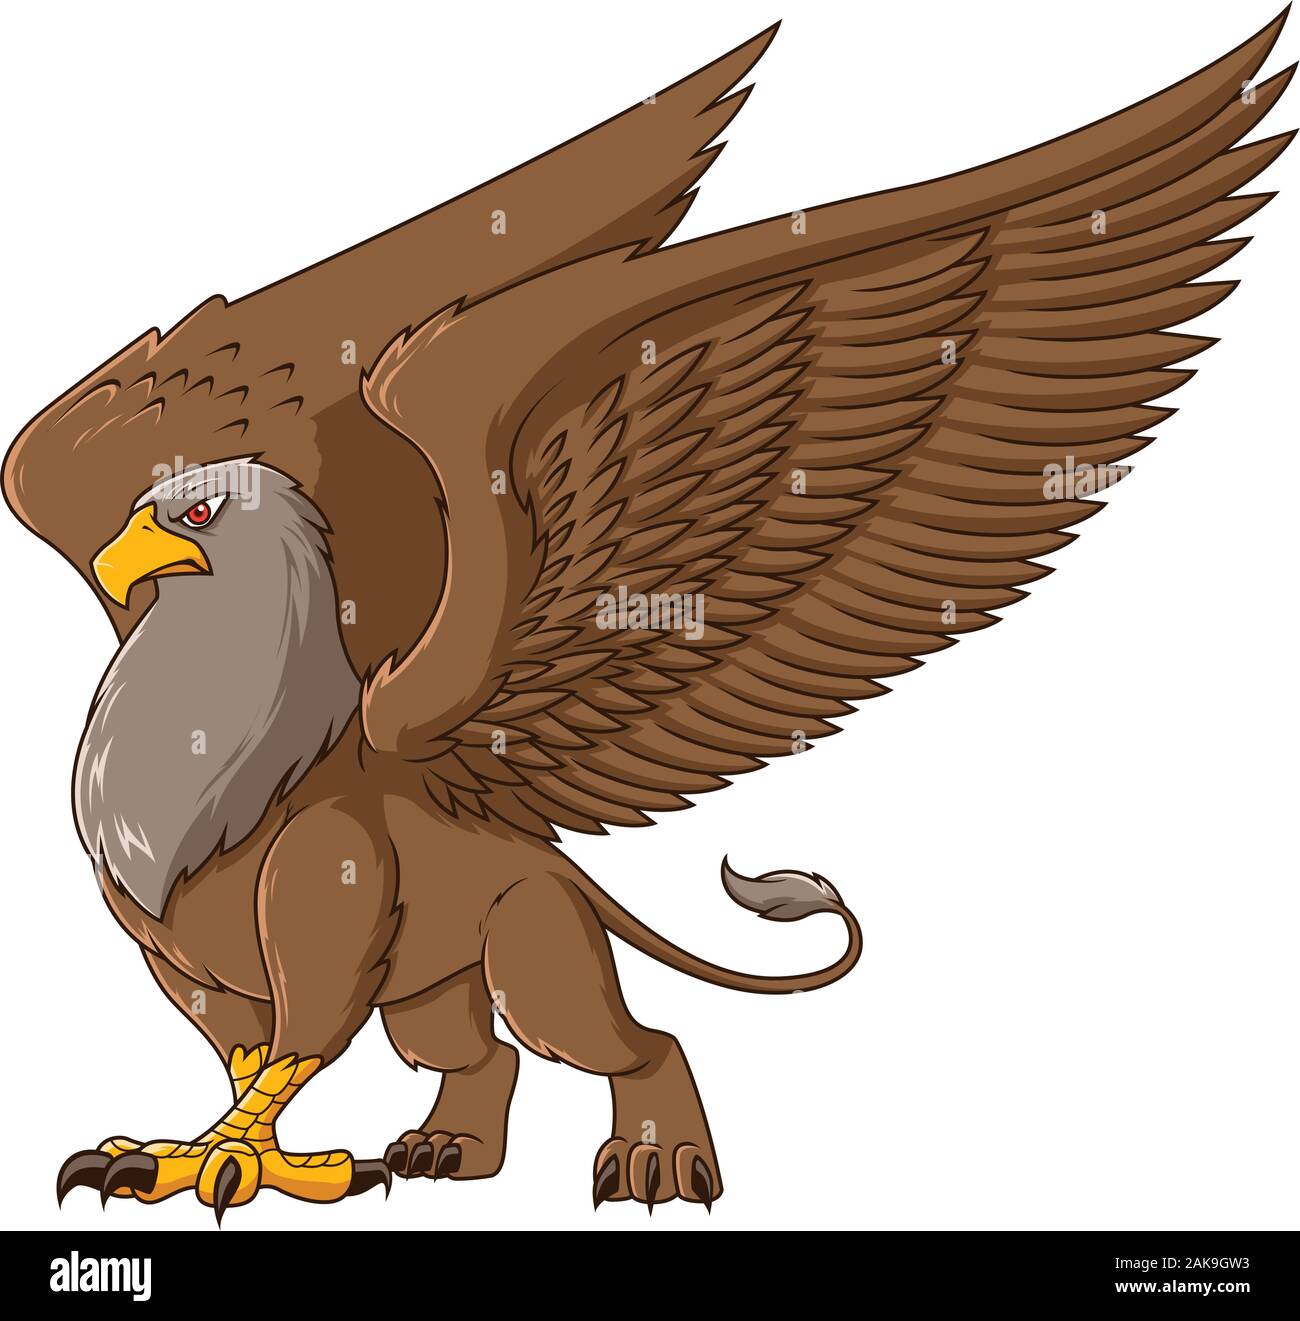 Griffin on White Stock Vector